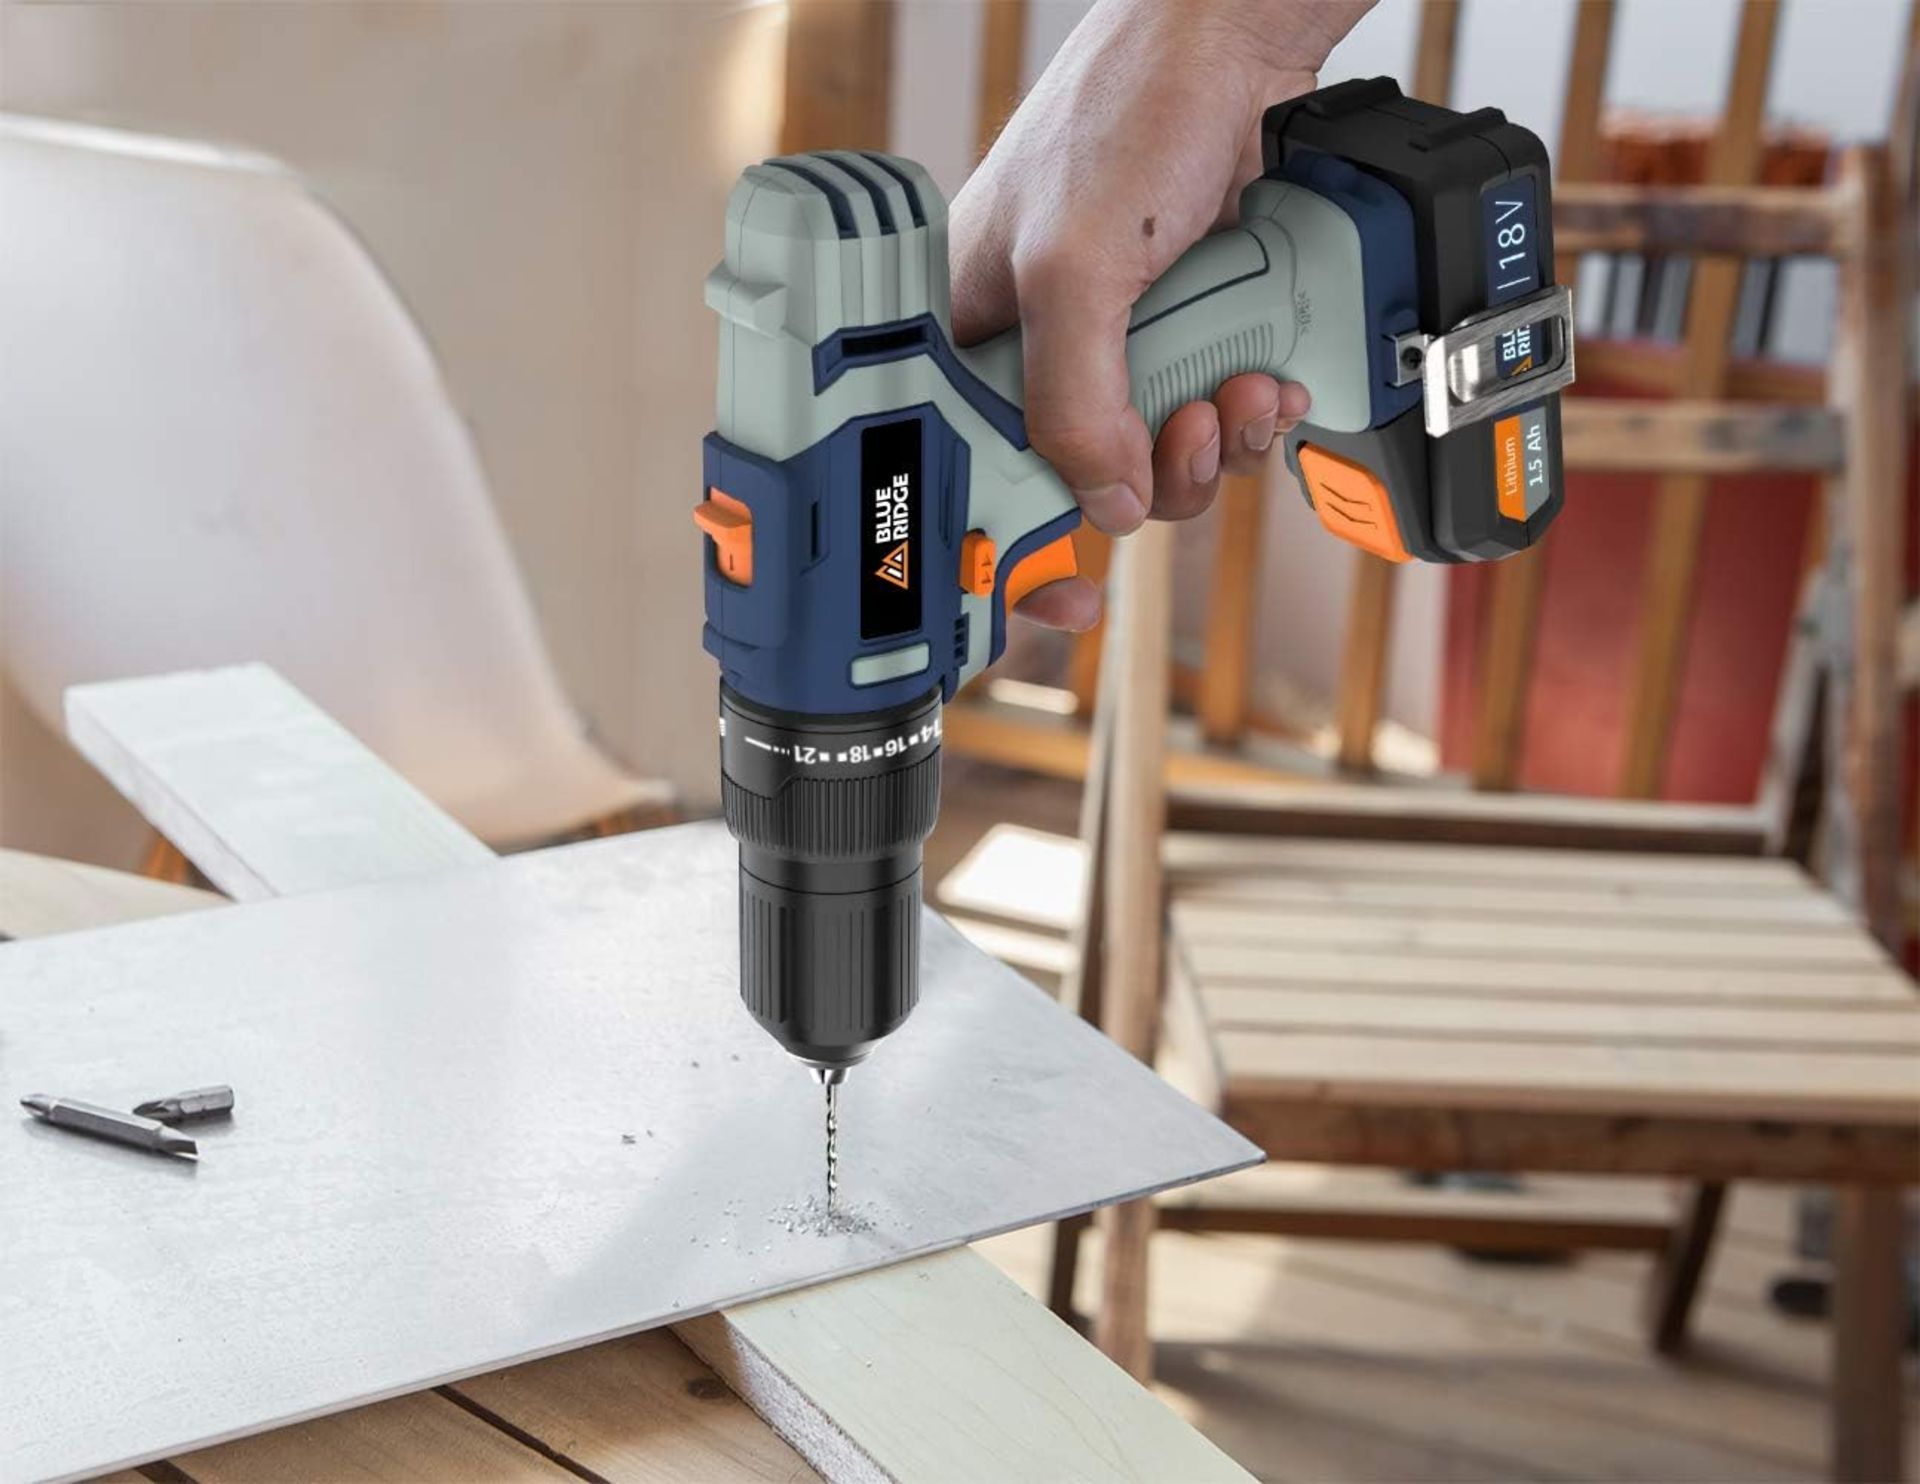 NEW & BOXED BLUE RIDGE 18V Cordless Hammer Drill with 2 x 1.5 Ah Li-ion Batteries & 43 Piece - Image 5 of 6